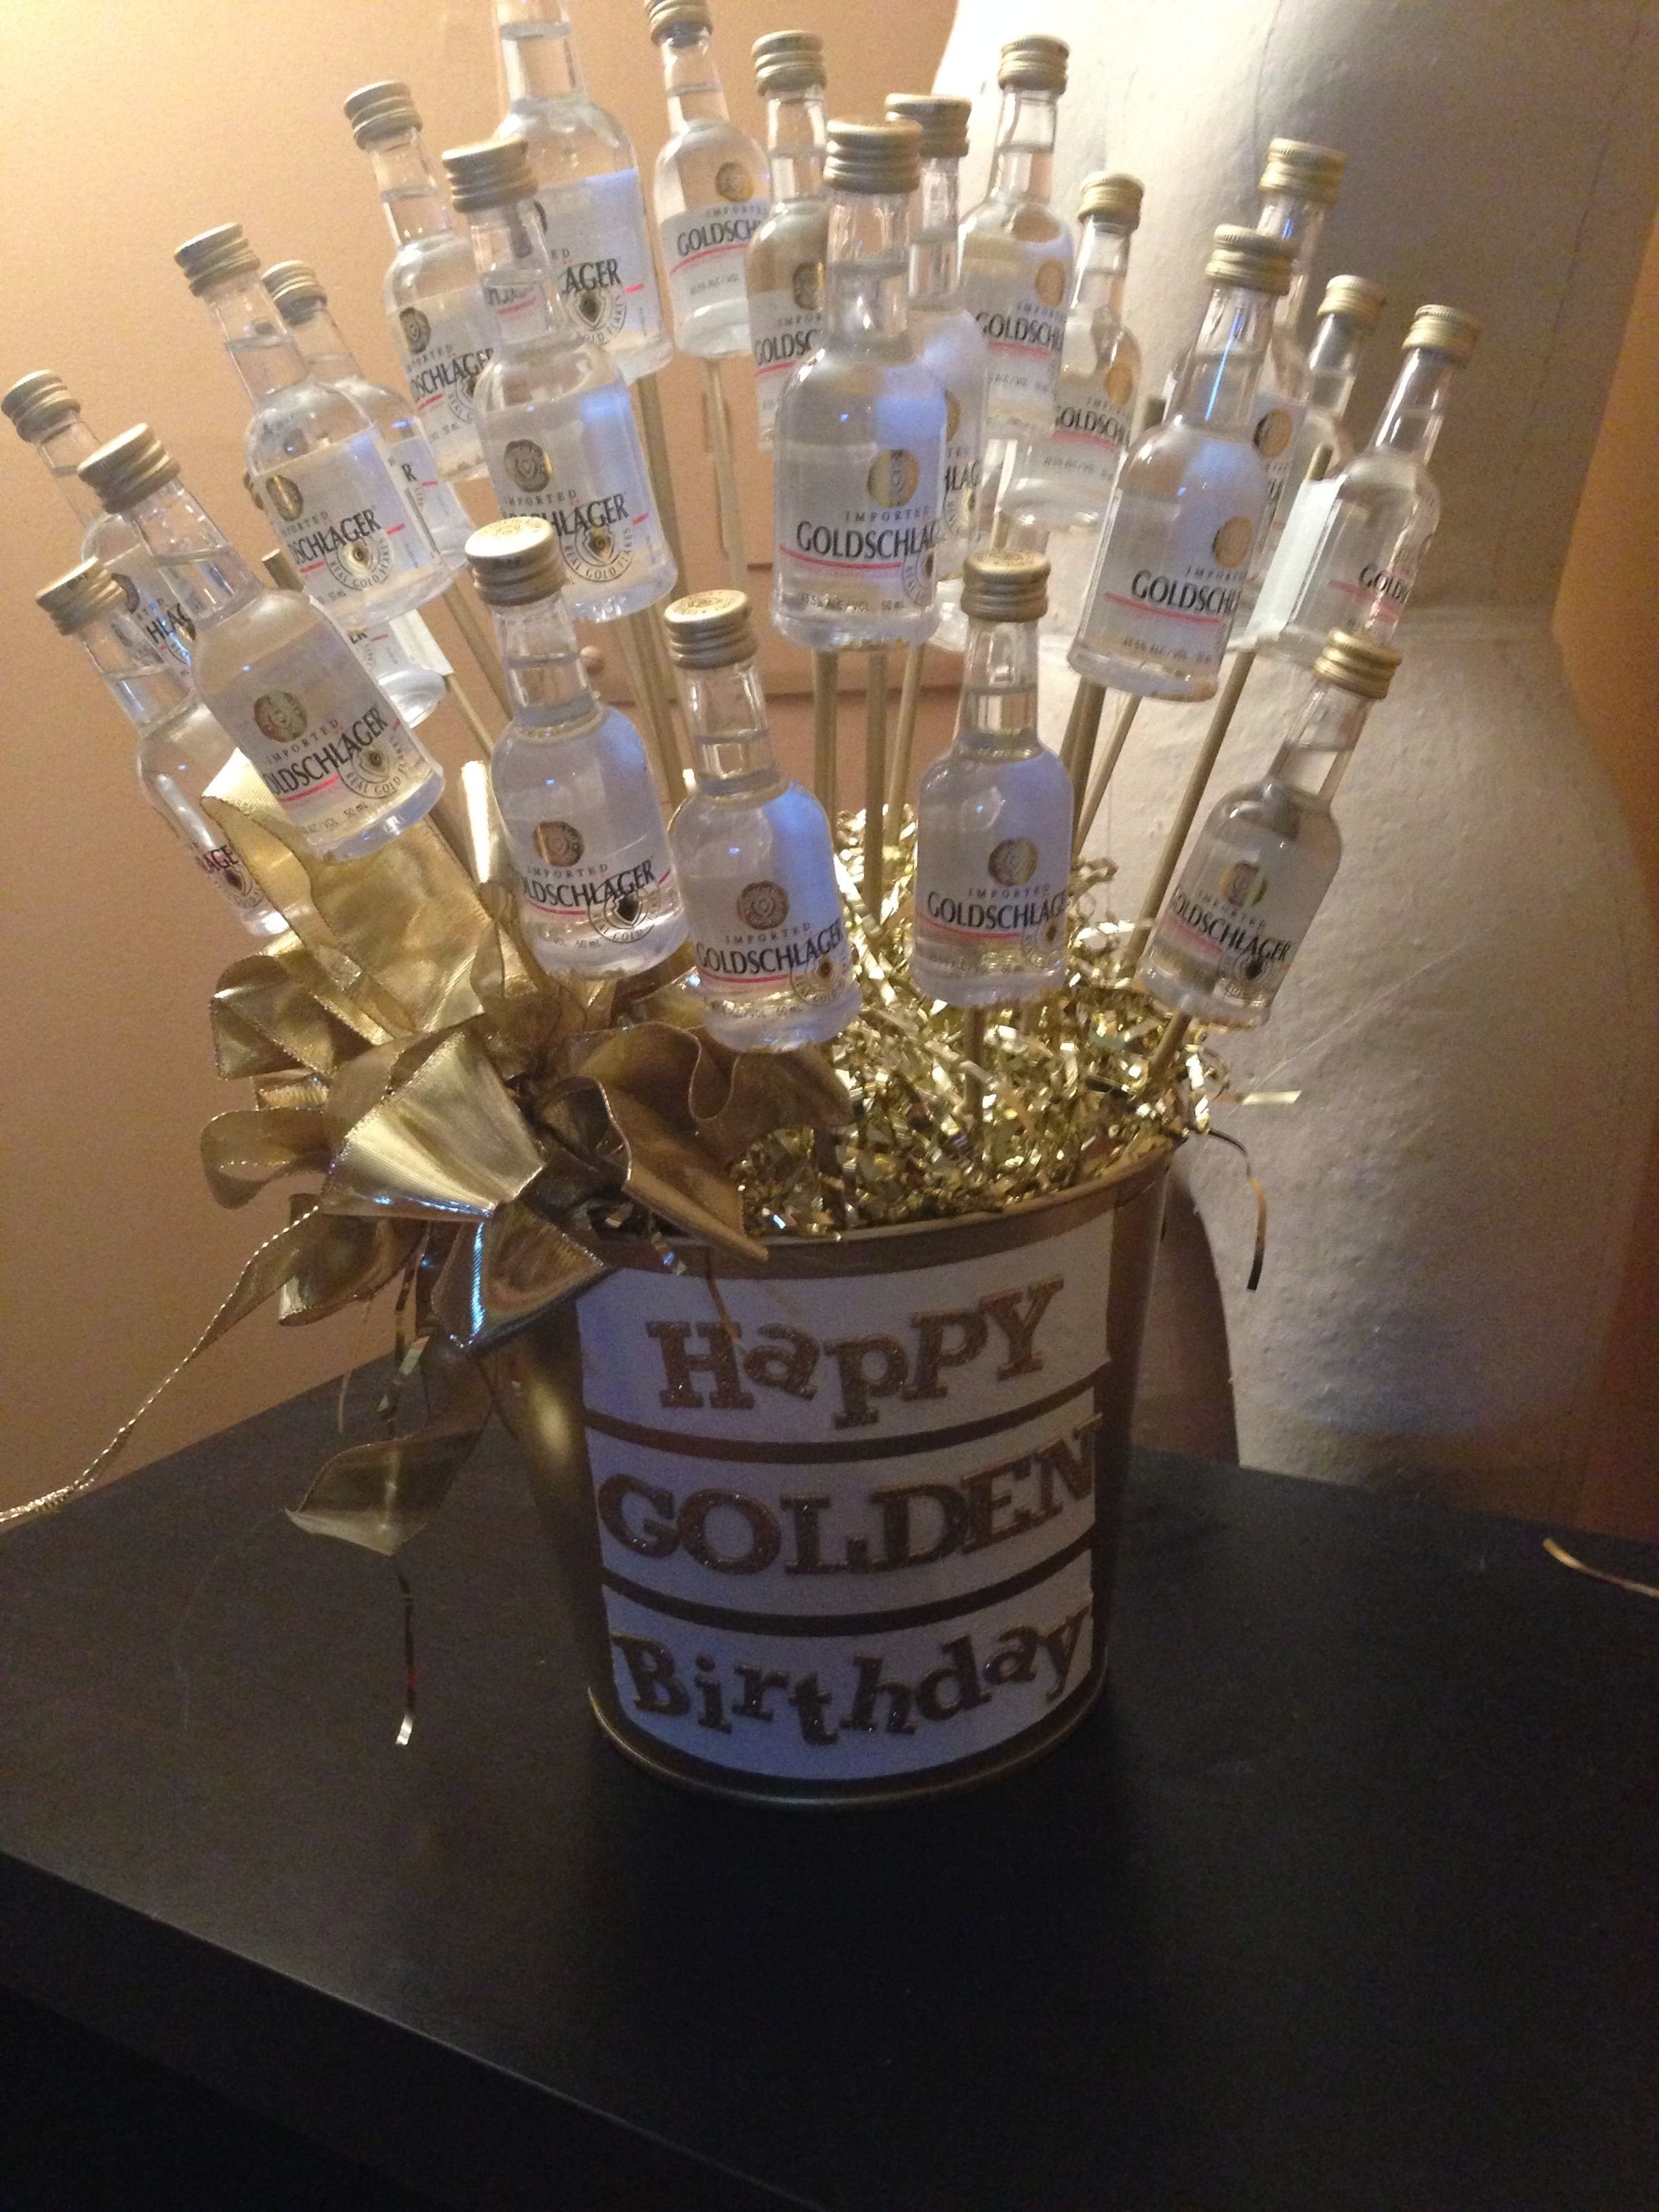 10 Unique Golden Birthday Party Ideas For Adults golden birthday gift ideas golden birthday pinterest golden 1 2022